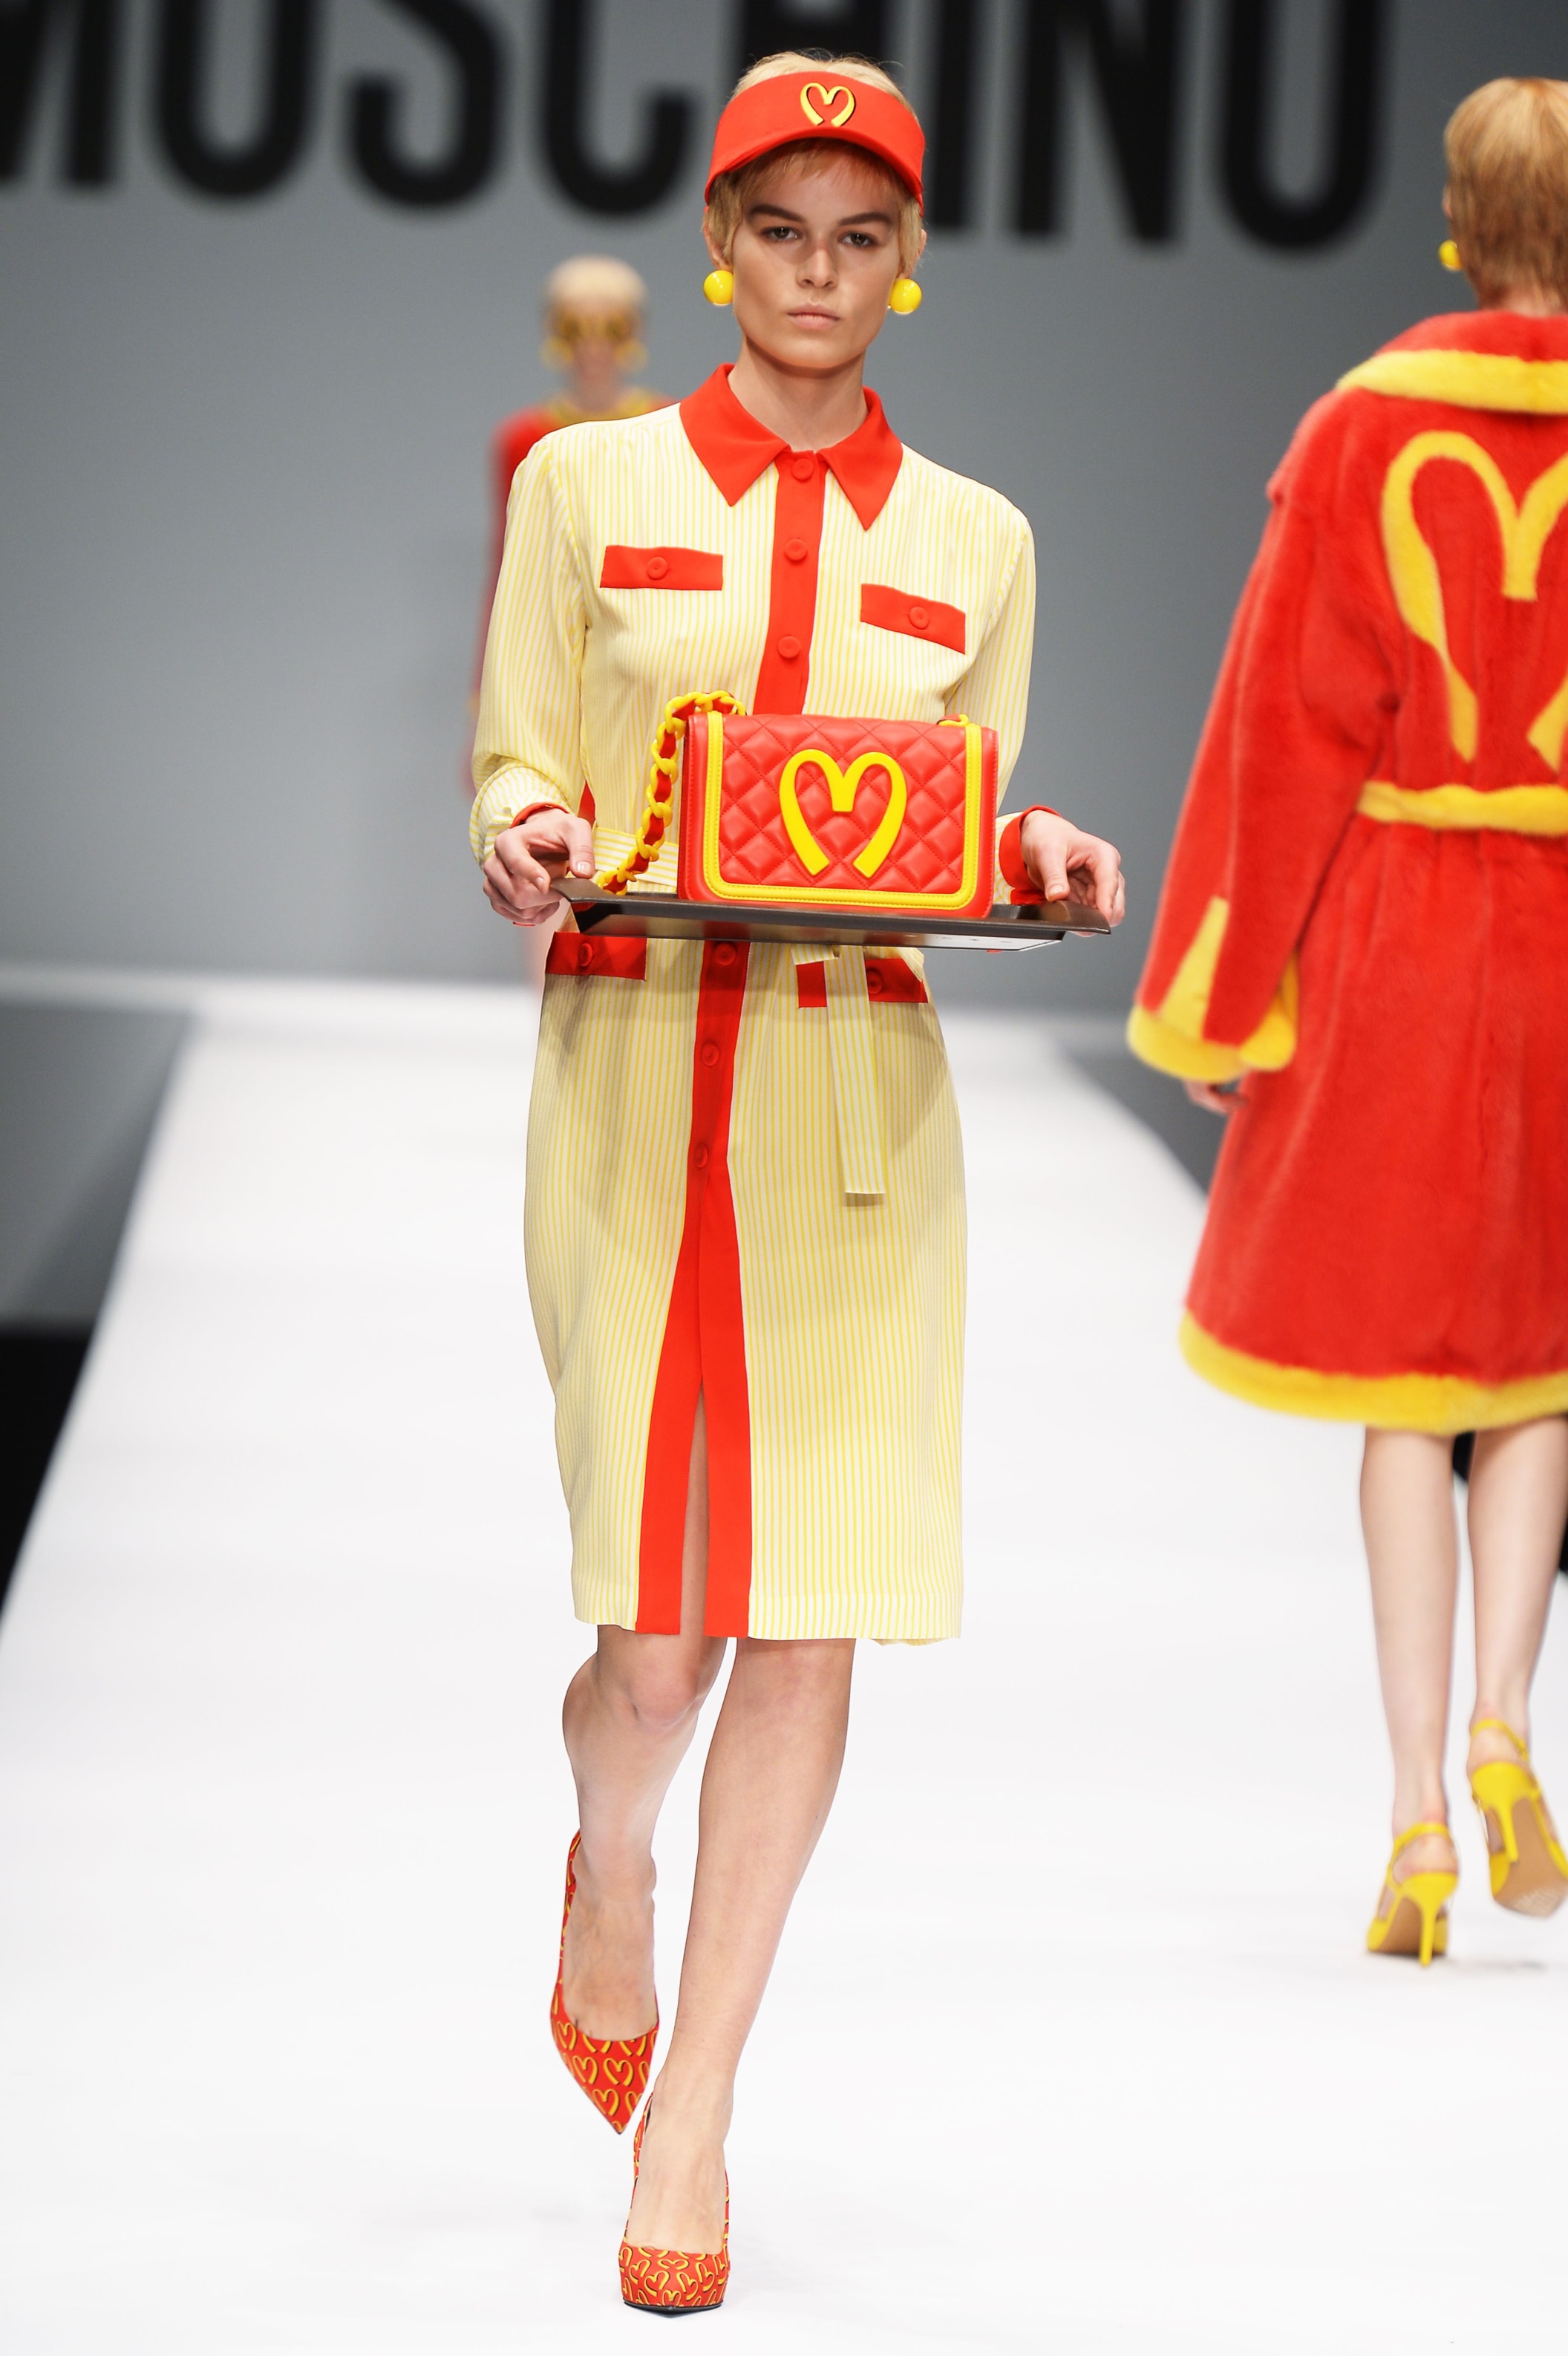 Jeremy Scott Creates a Collector's Edition Barbie for Moschino